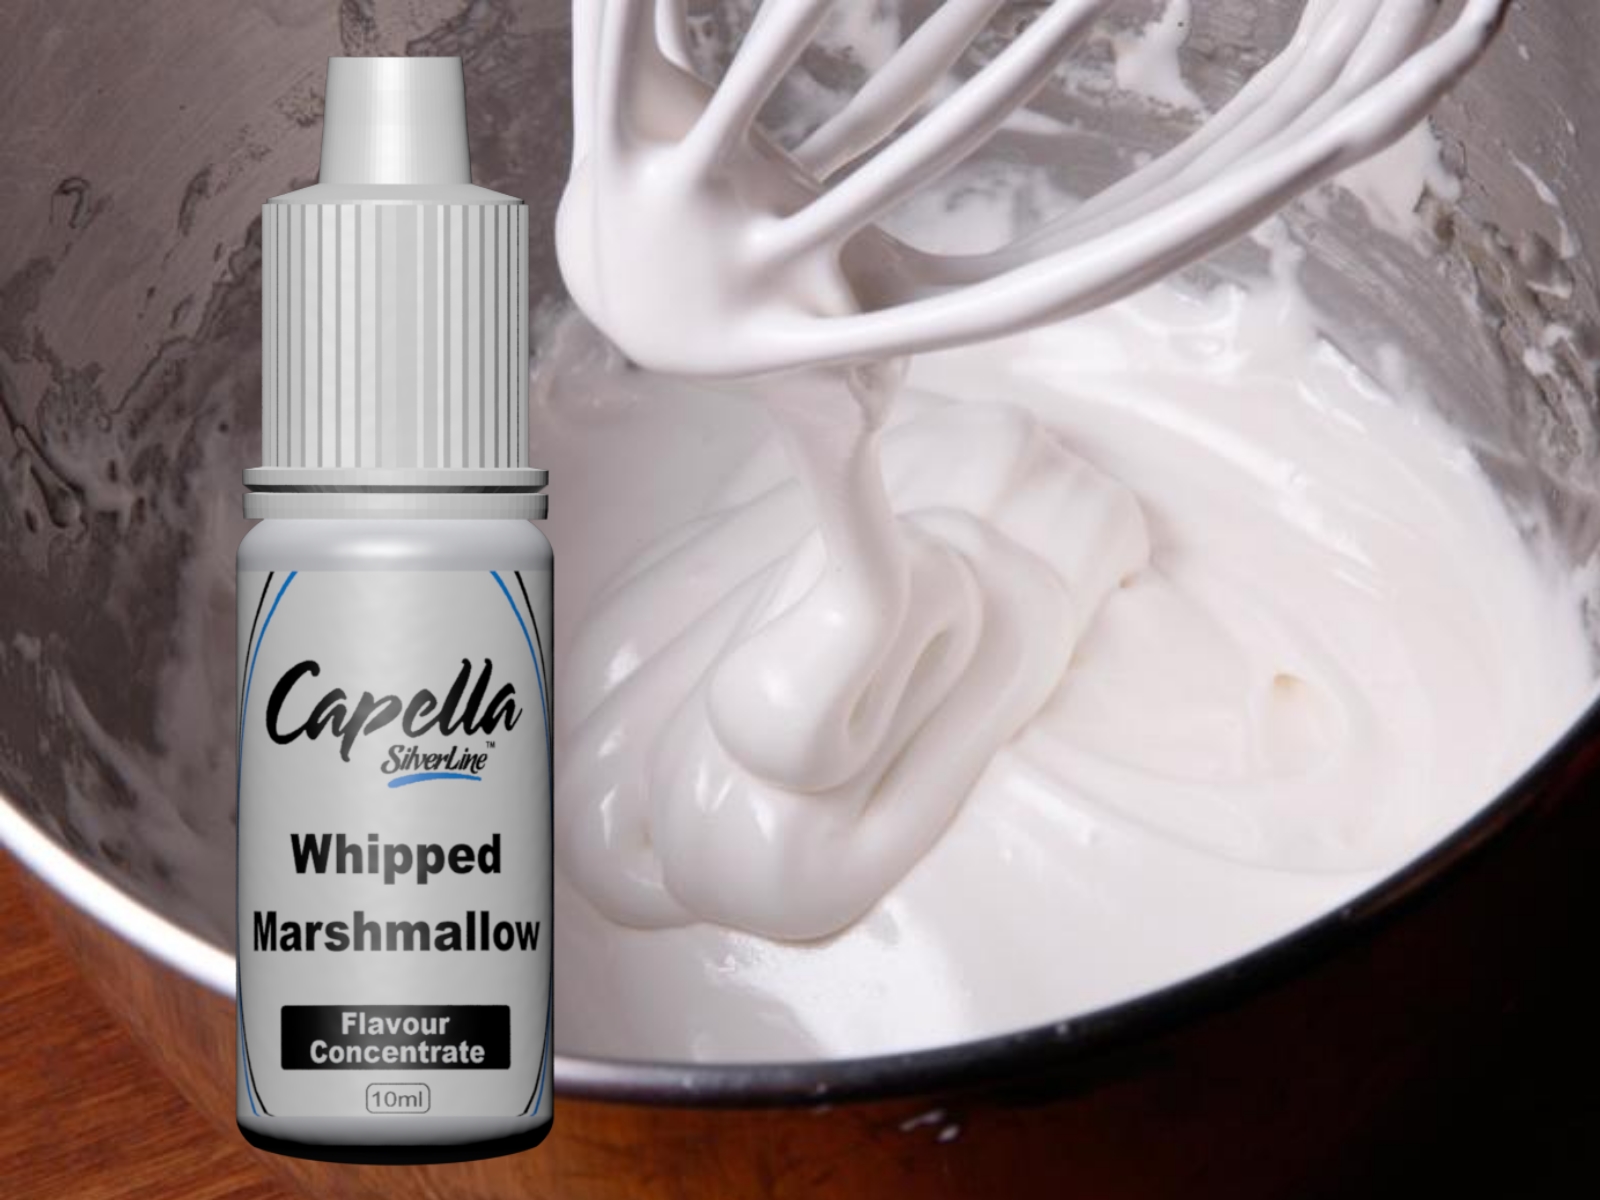 Capella Silverline Whipped Marshmallow Flavour